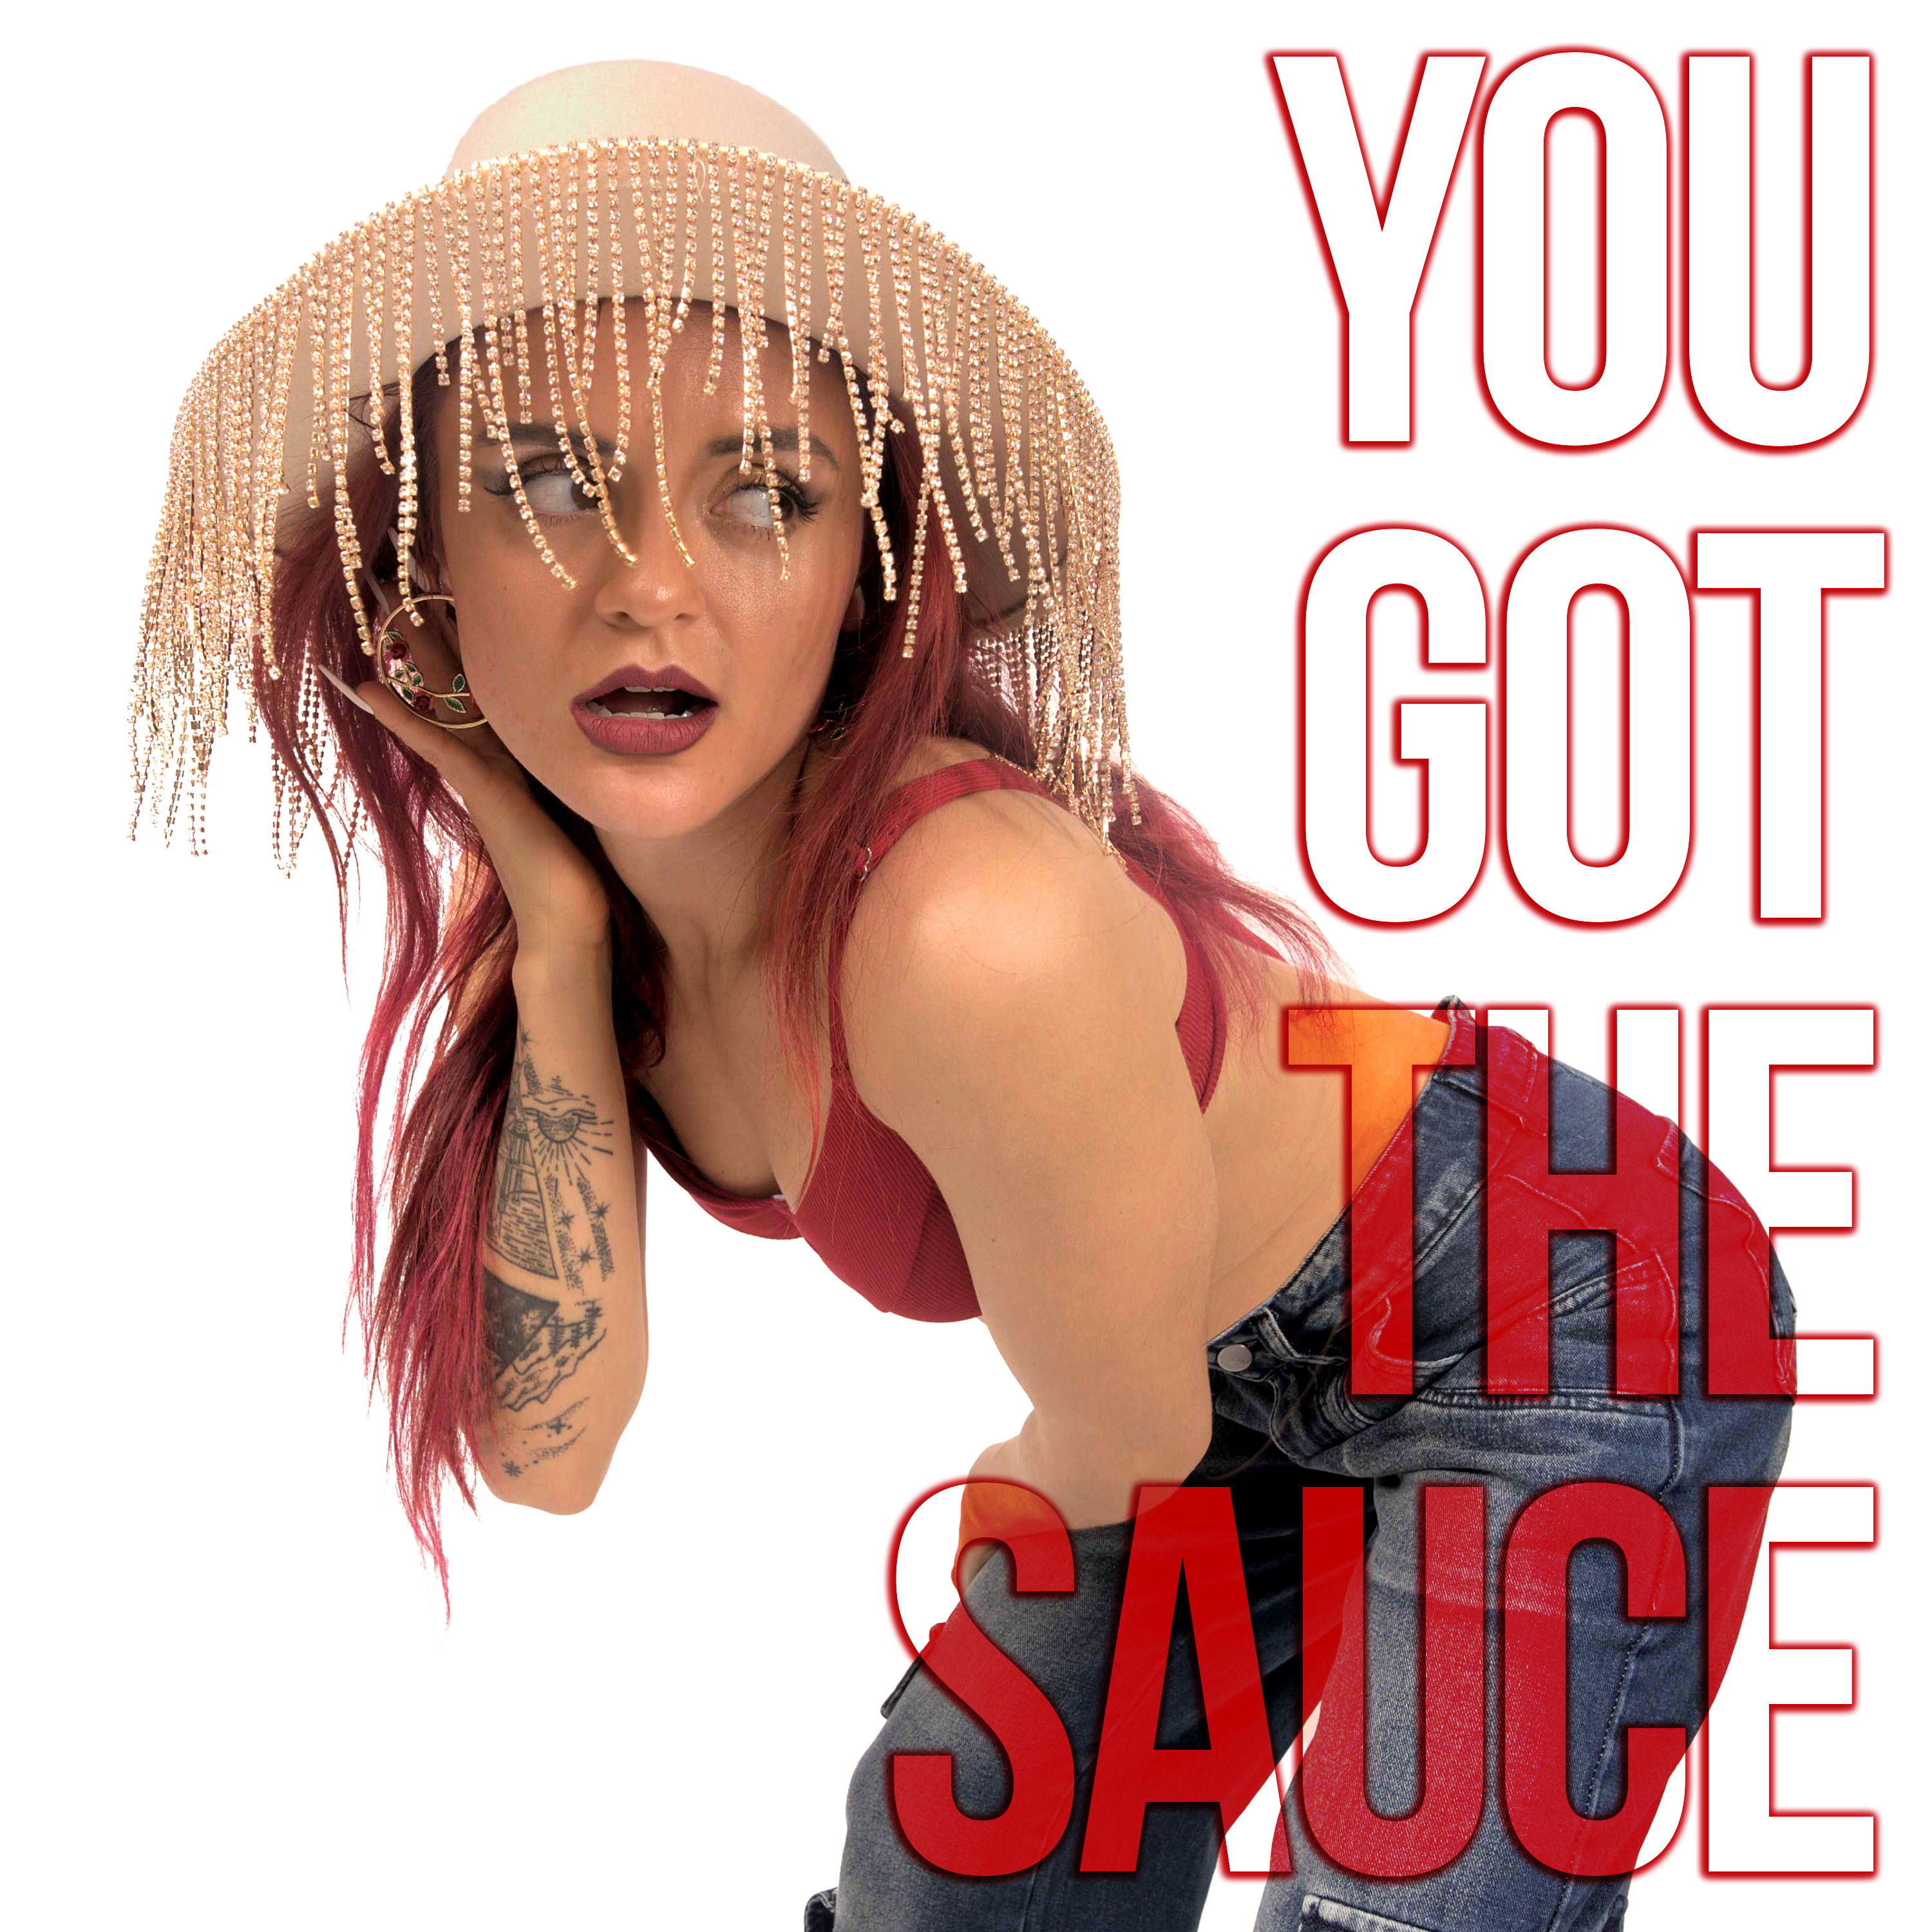 Paytra Details Her Songwriting Process And Talks About Her New Single ‘You Got The Sauce’